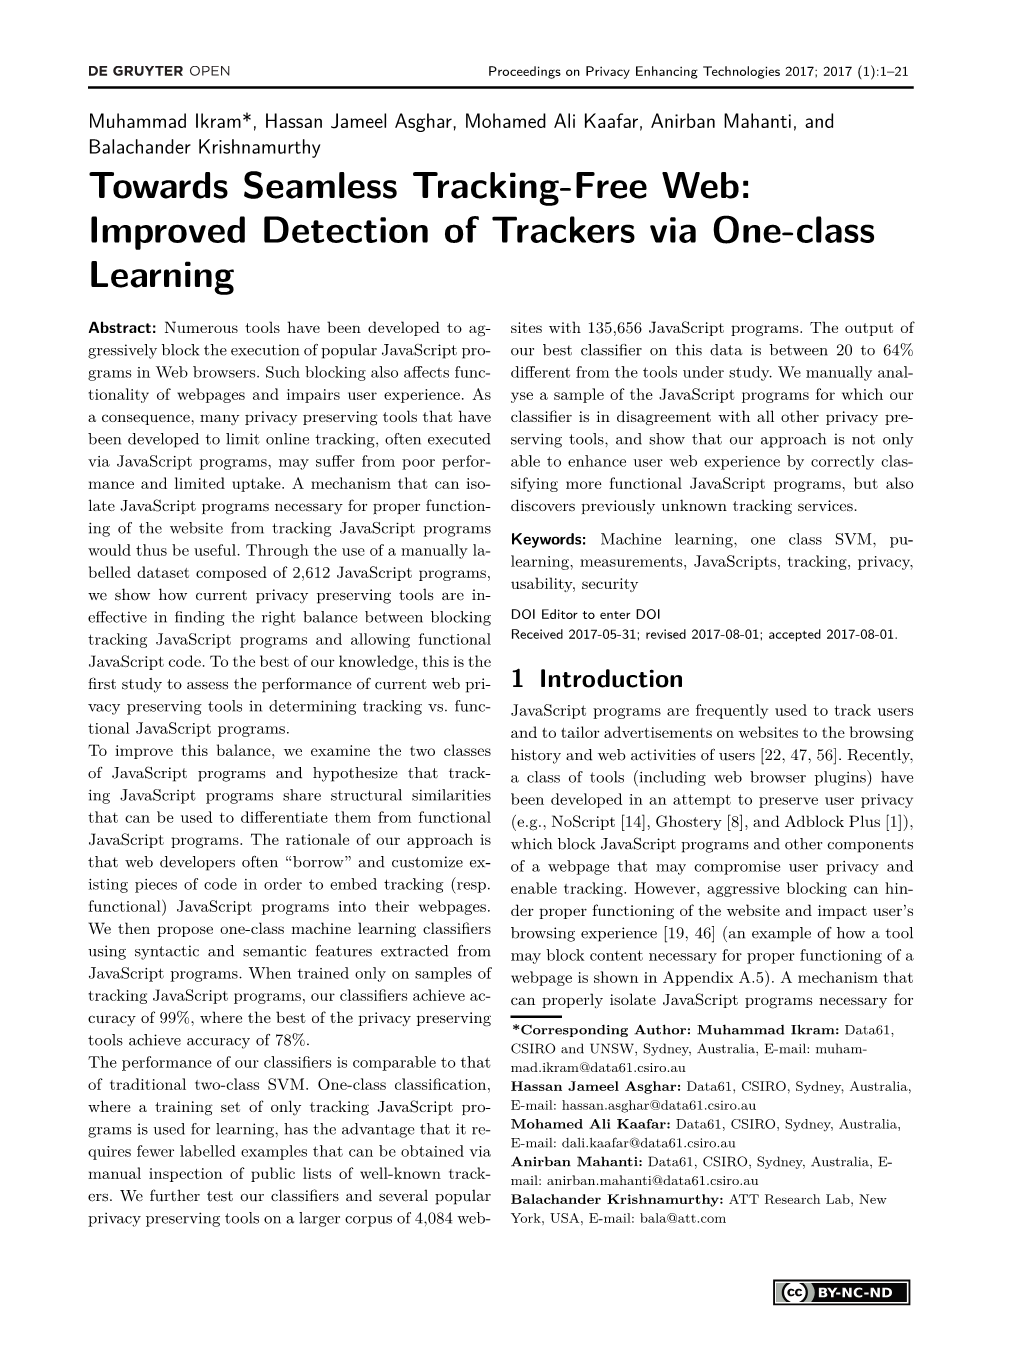 Towards Seamless Tracking-Free Web: Improved Detection of Trackers Via One-Class Learning